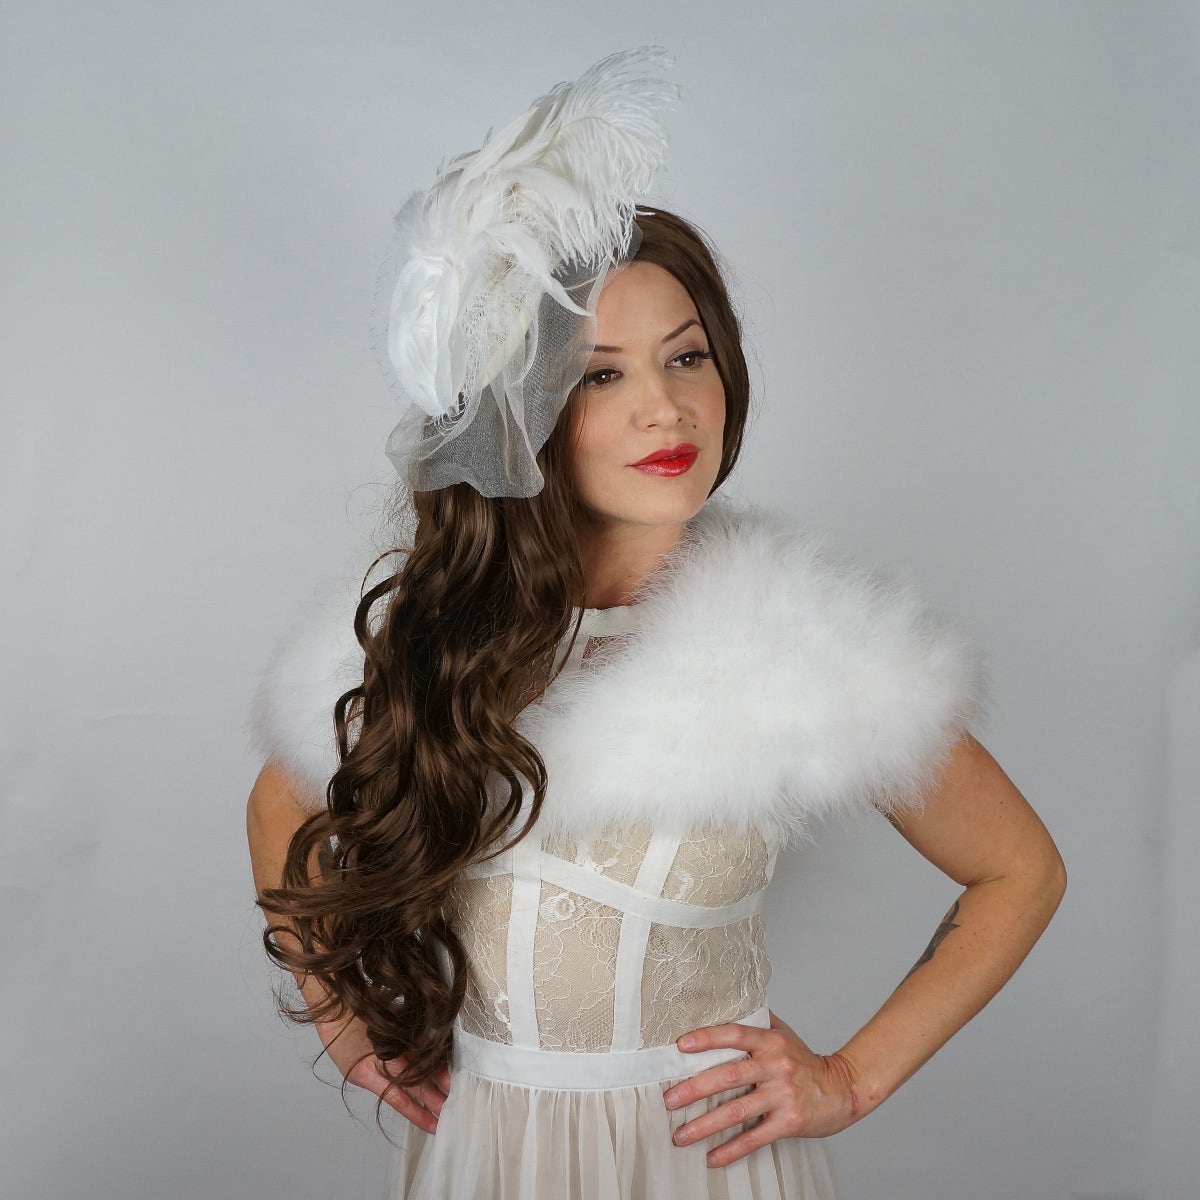 Ostrich Feather Fascinator Wedding, Victorian Style Party Hair Accessory - White